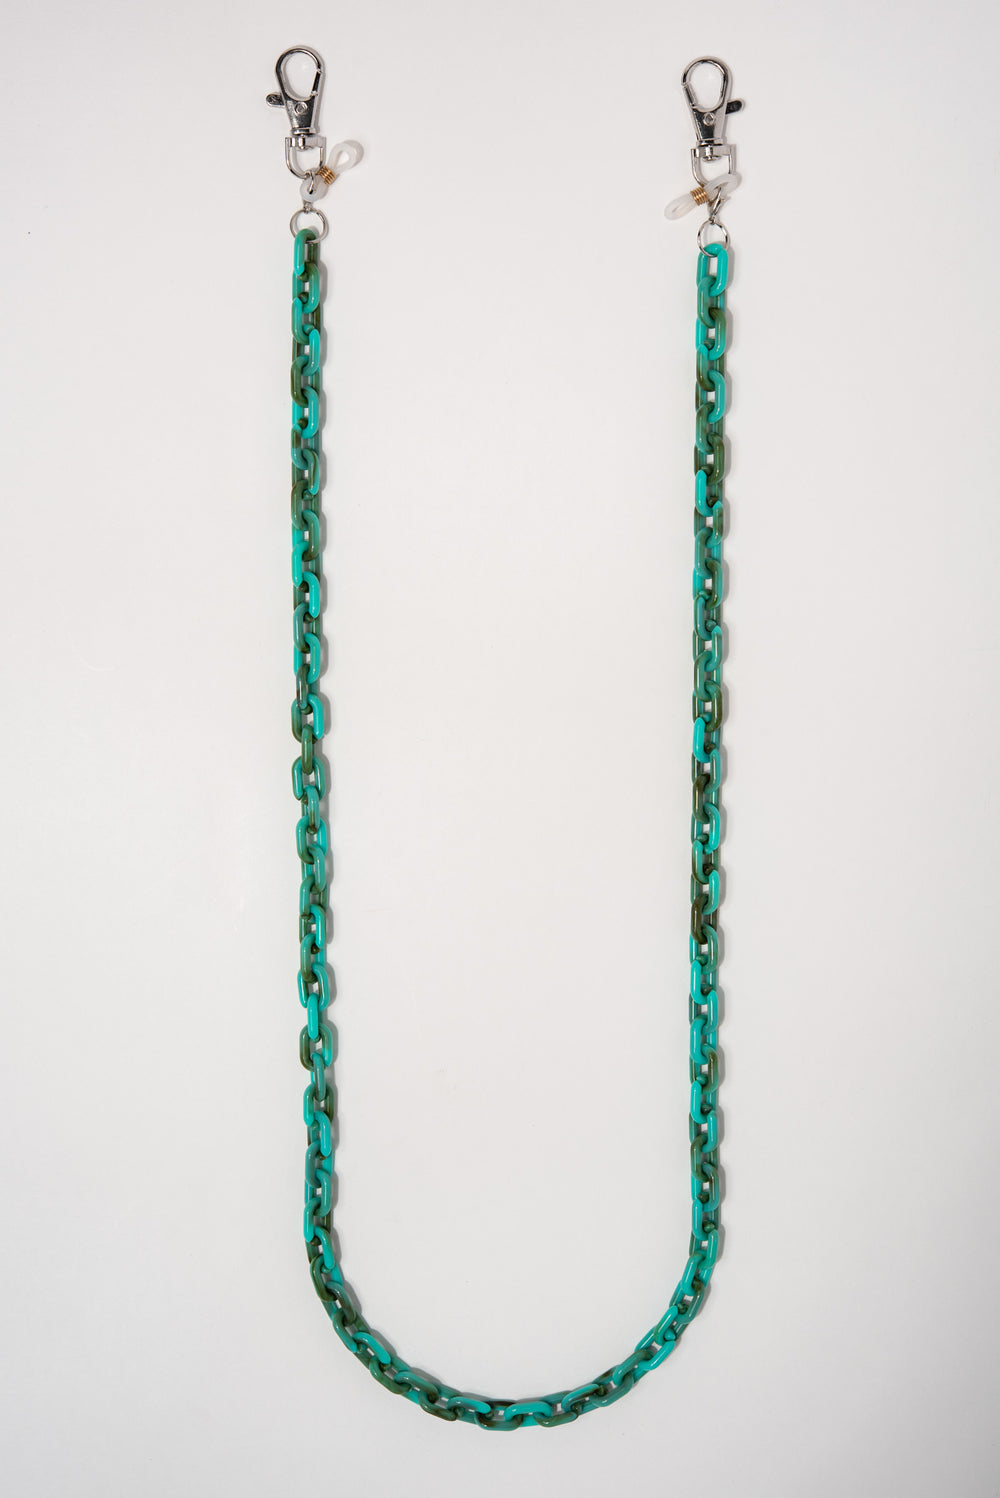 Kasey Glasses & Mask Chain Link - Turquoise